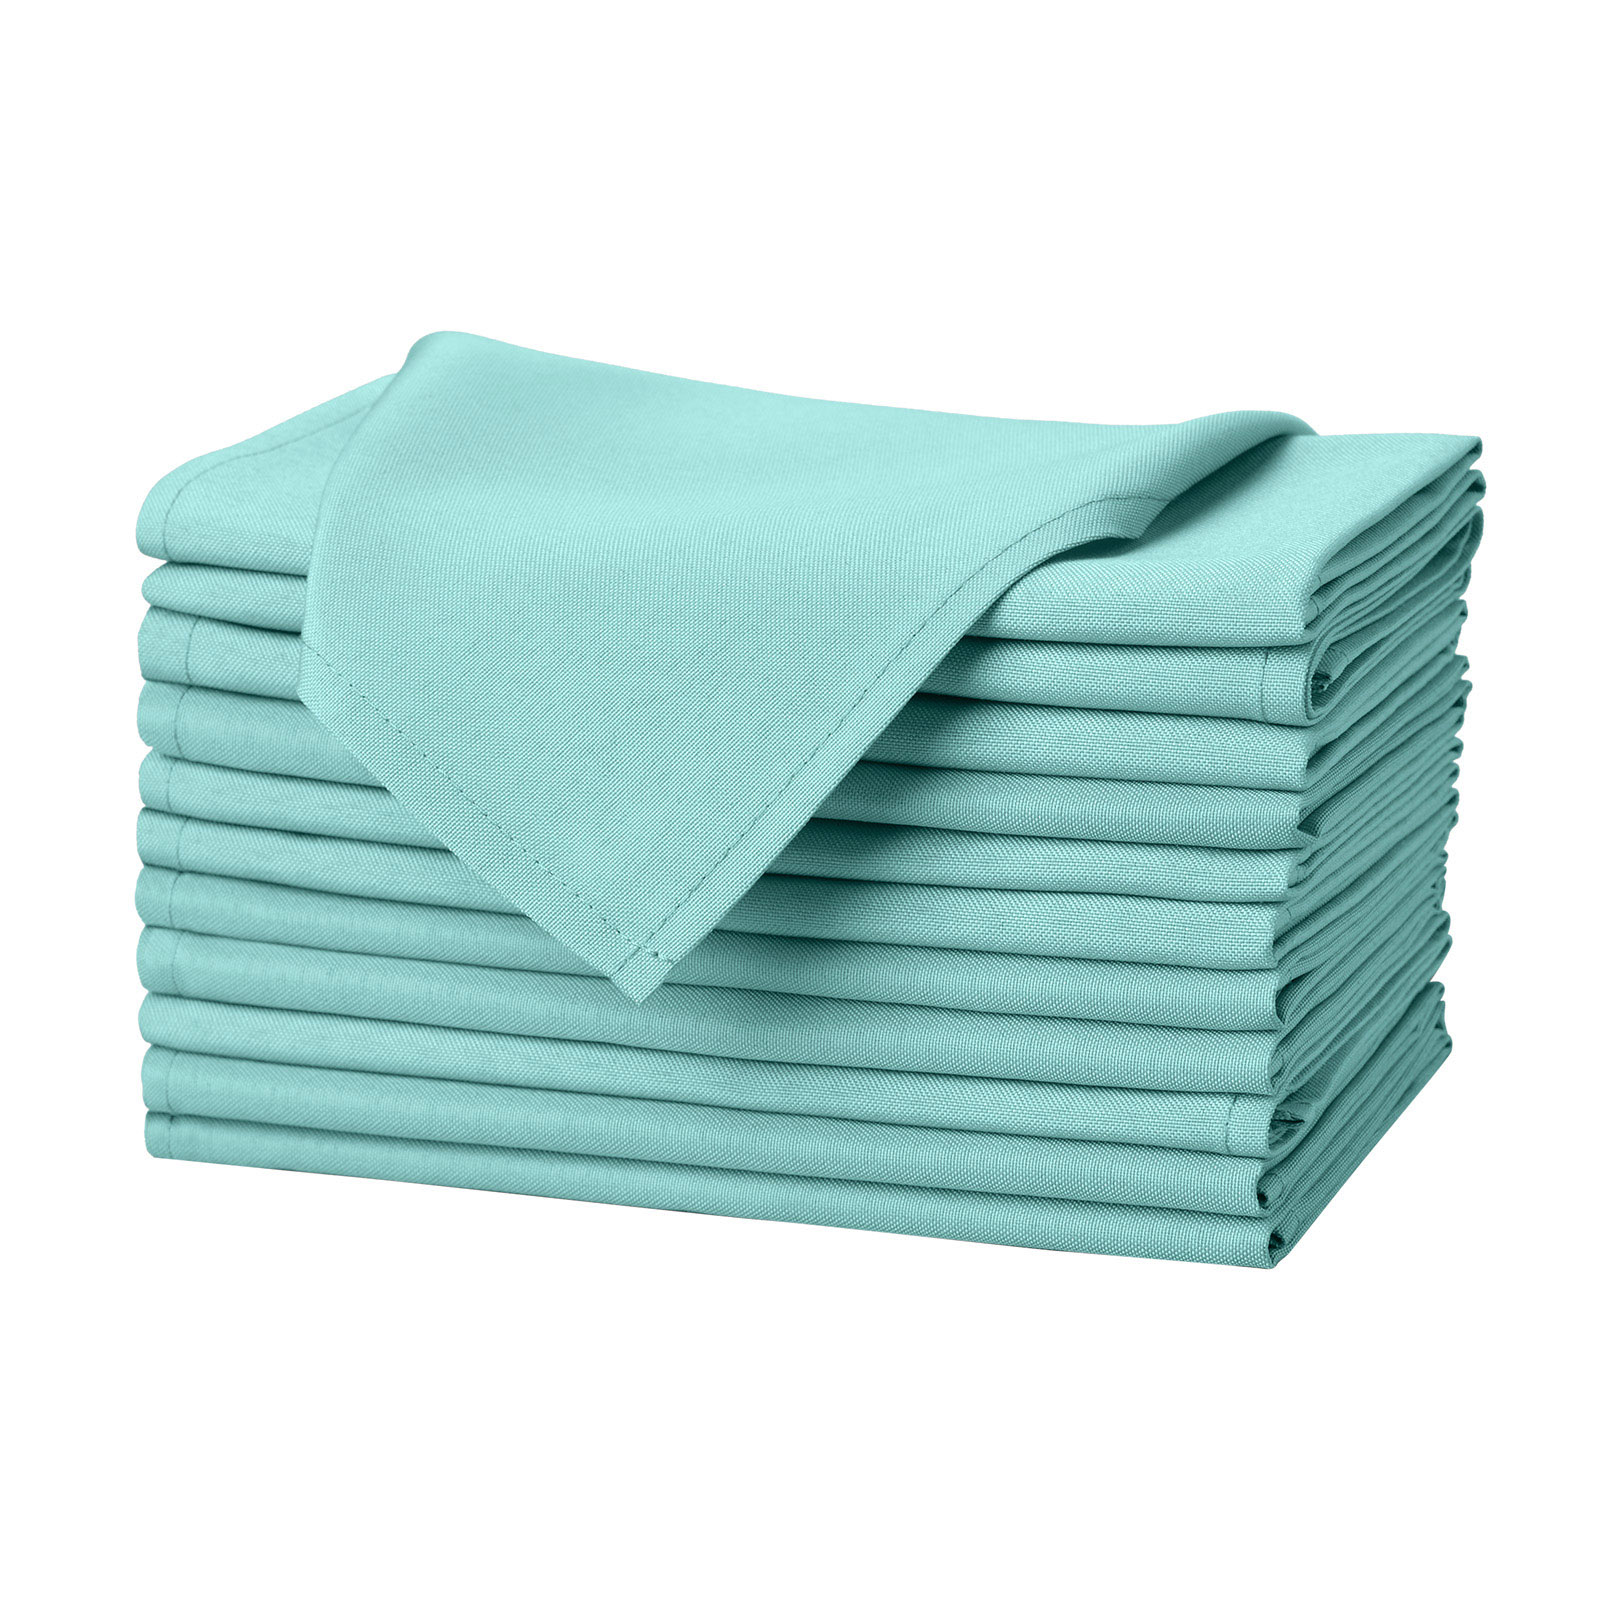 Threadmill Cloth Napkins Set of 6 Cotton | Resuable 16x20 inch Napkins  Cloth Washable, Dinner Napkins Perfect for Wedding, Parties, Cocktails,  Fall